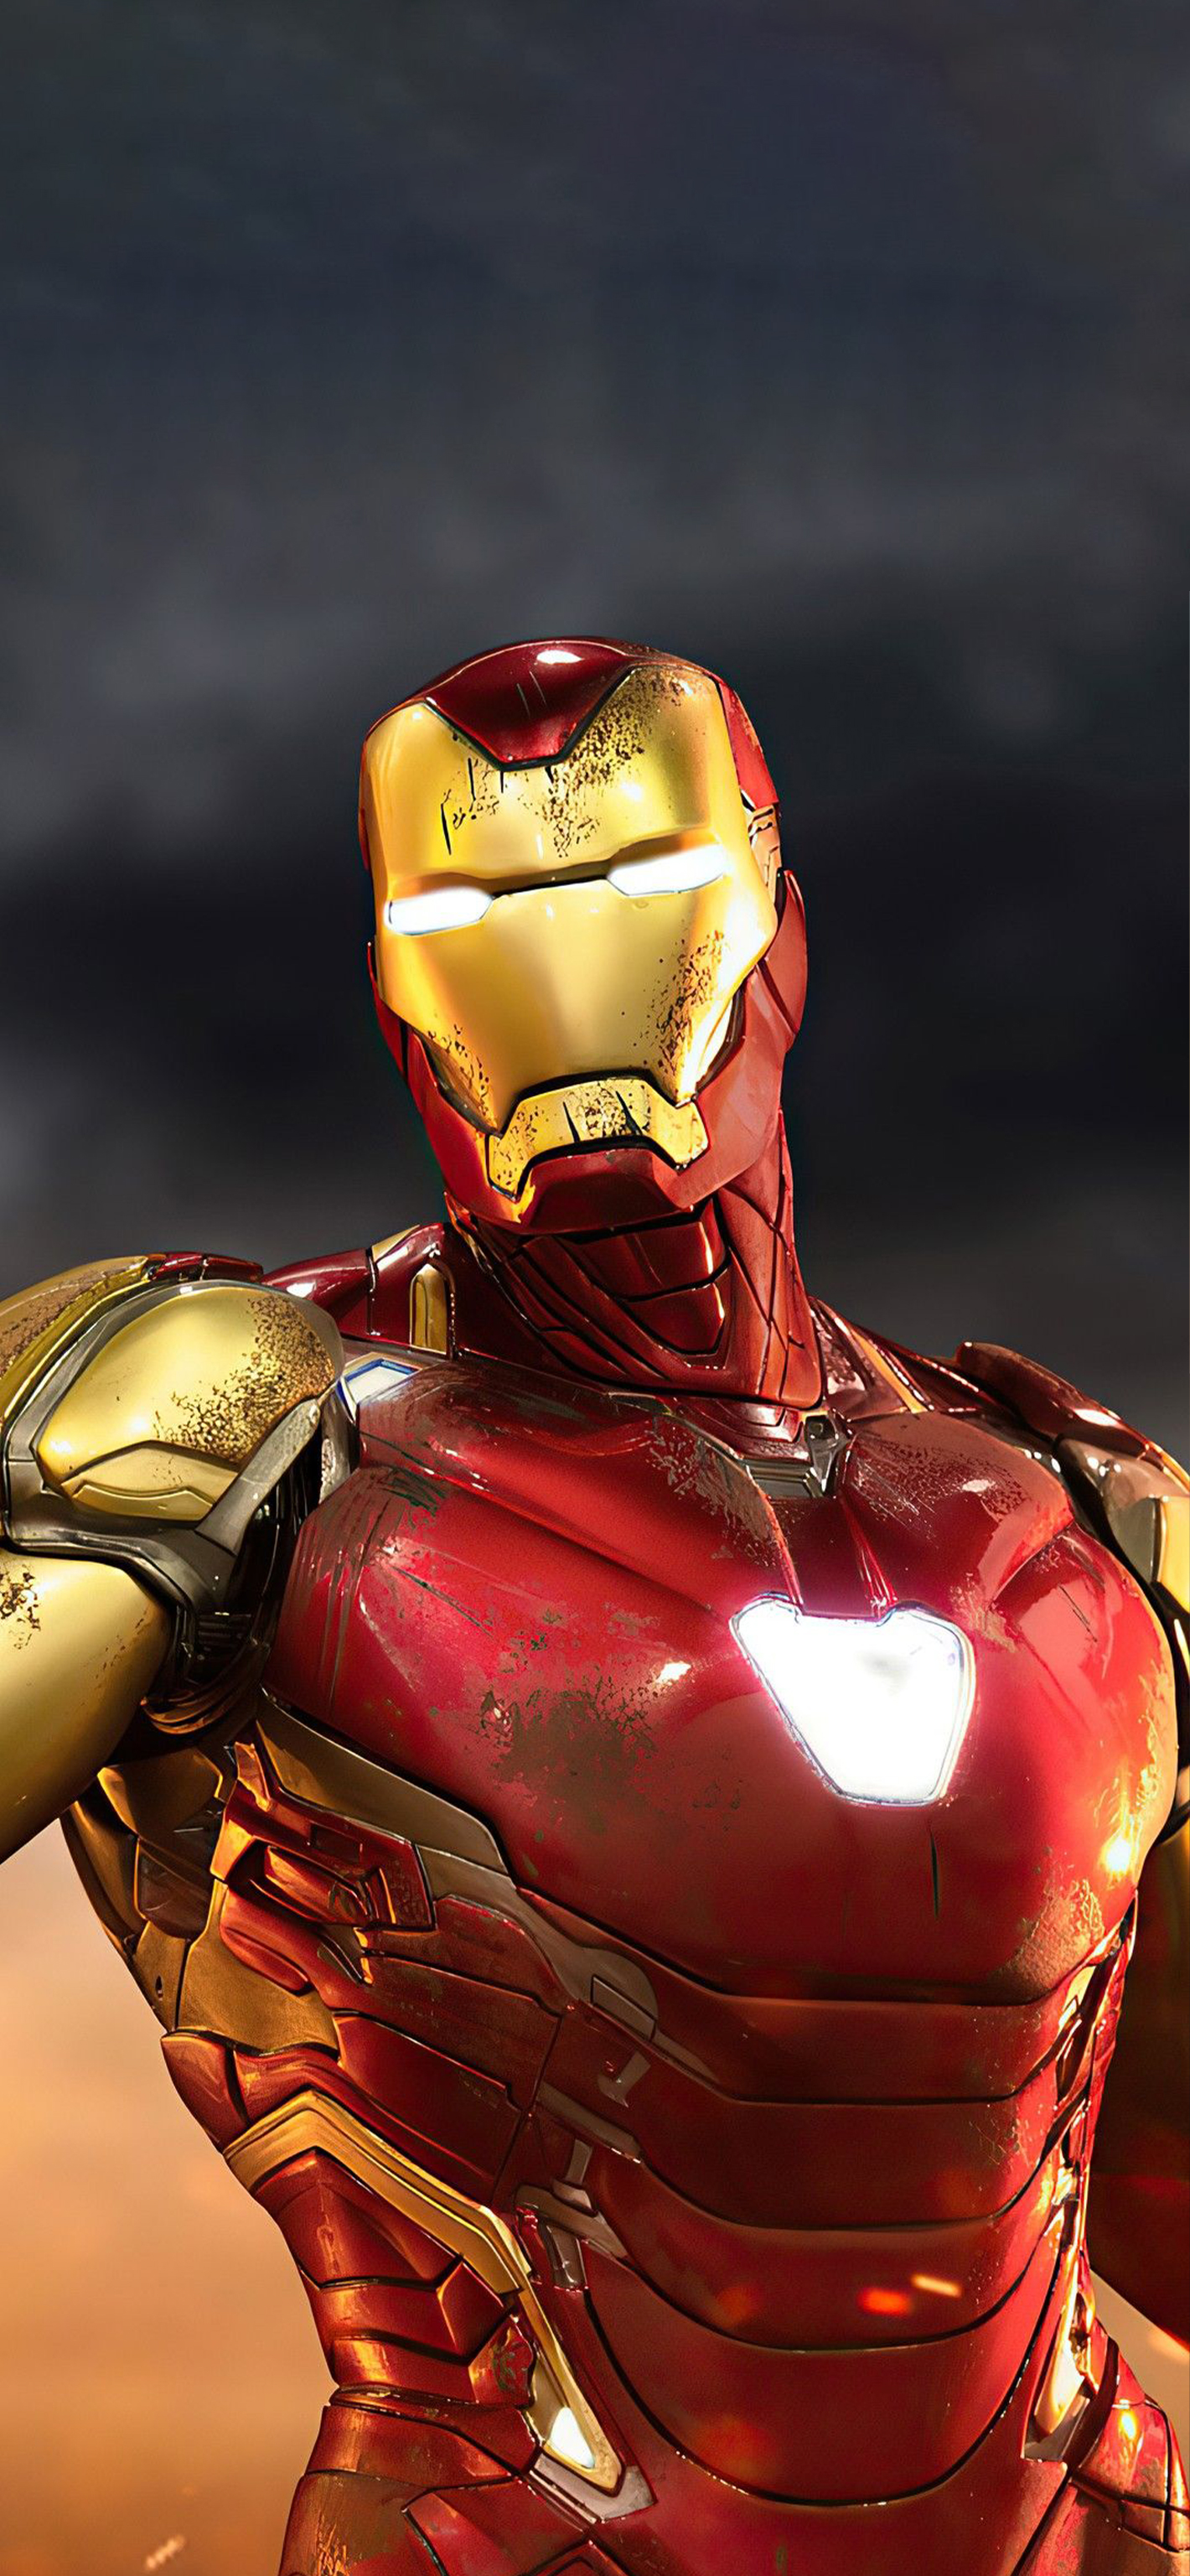 iPhone Wallpapers for iPhone 8 iPhone 8 Plus iPhone 6s iPhone 6s Plus  iPhone X and iPod Touch High Qu  Iron man wallpaper Iron man avengers  Marvel wallpaper